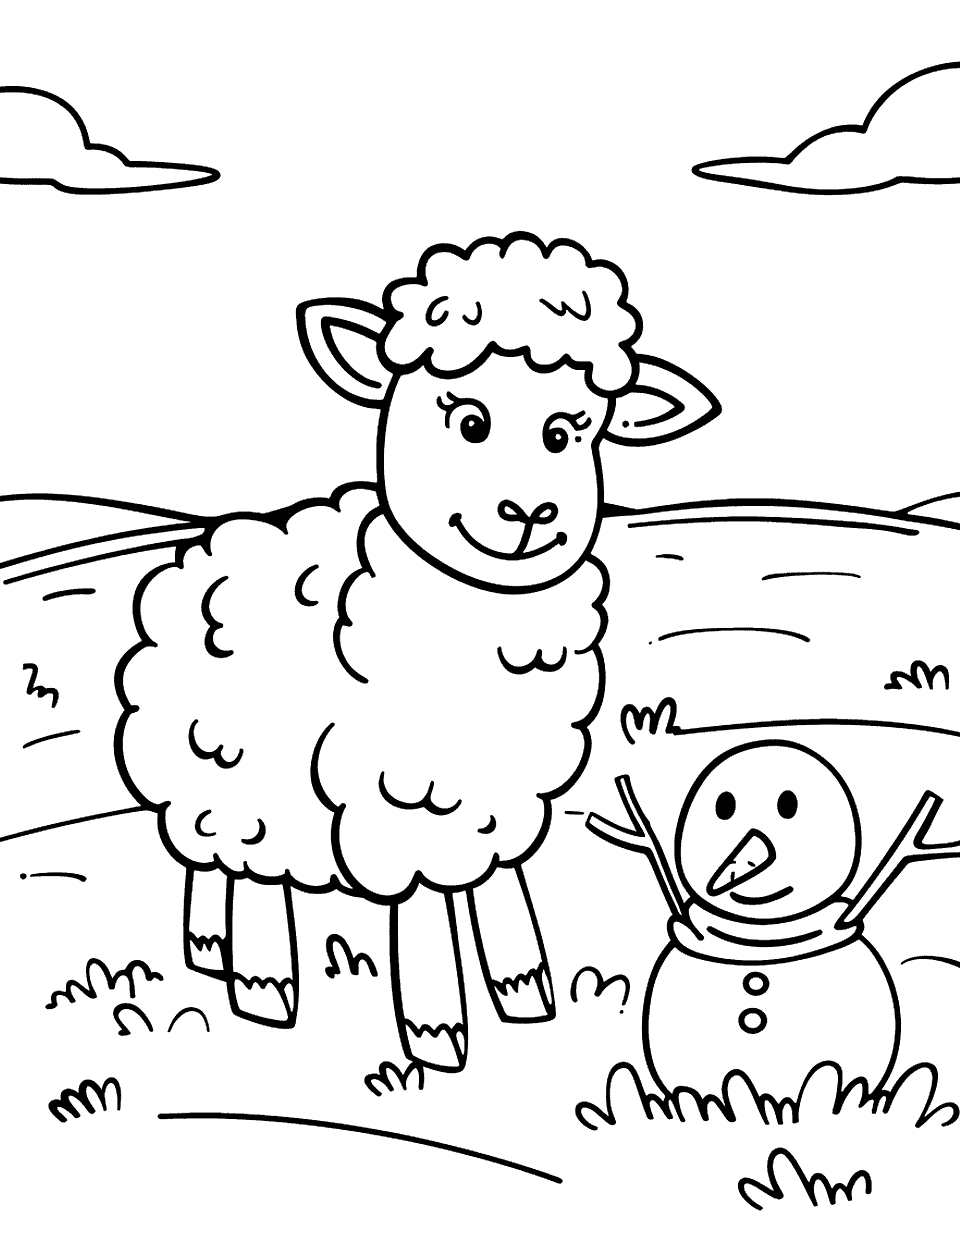 Sheep Making a Snowman Coloring Page - A sheep playfully assembling a snowman in a snowy field.